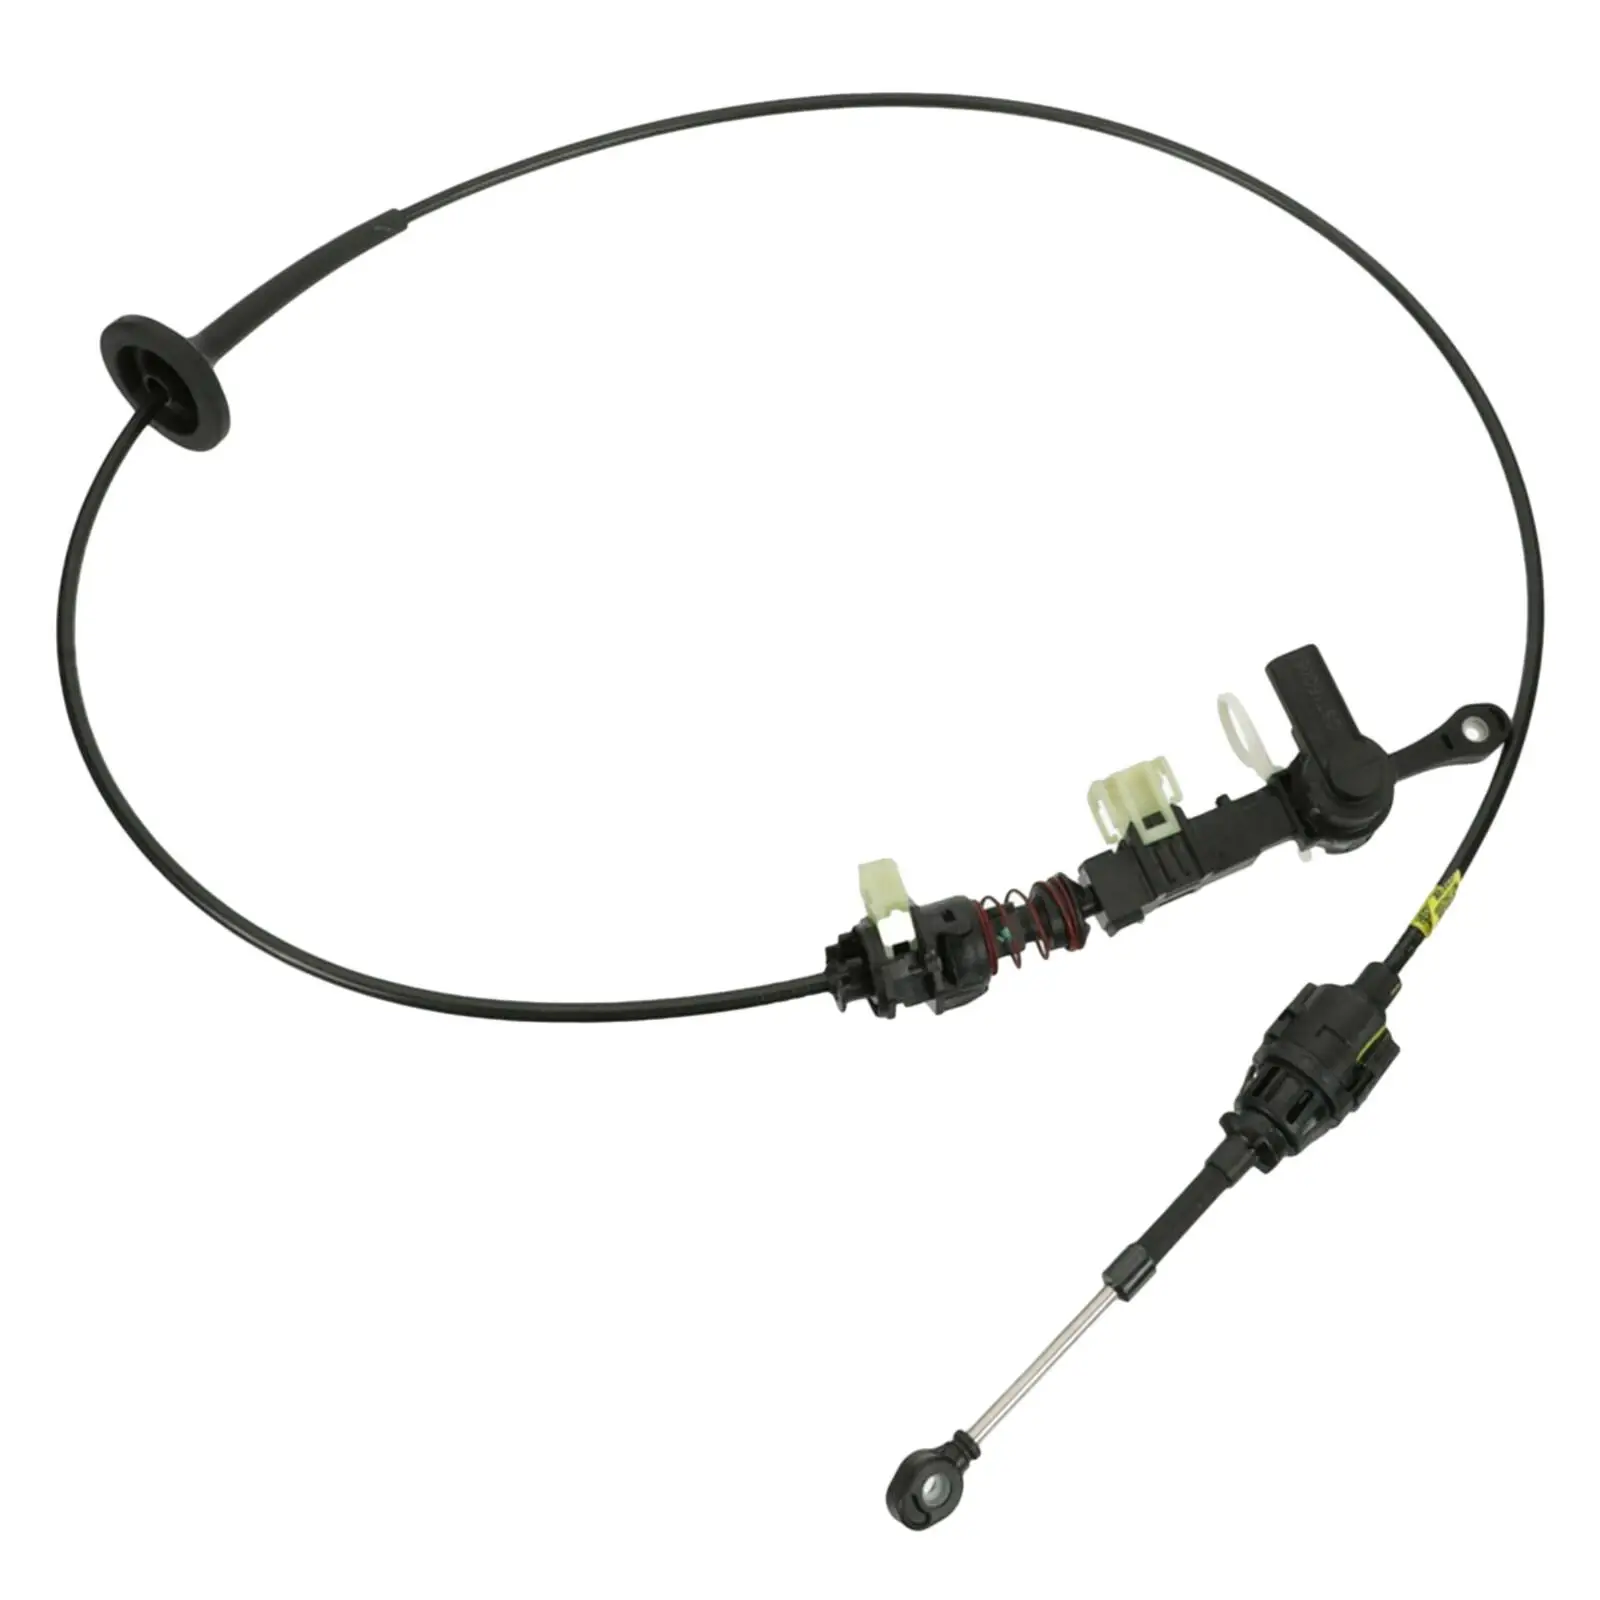  Control Cable,e Parts, Cable Modification Accessories Fit for RAM Pickup 02-500 3500